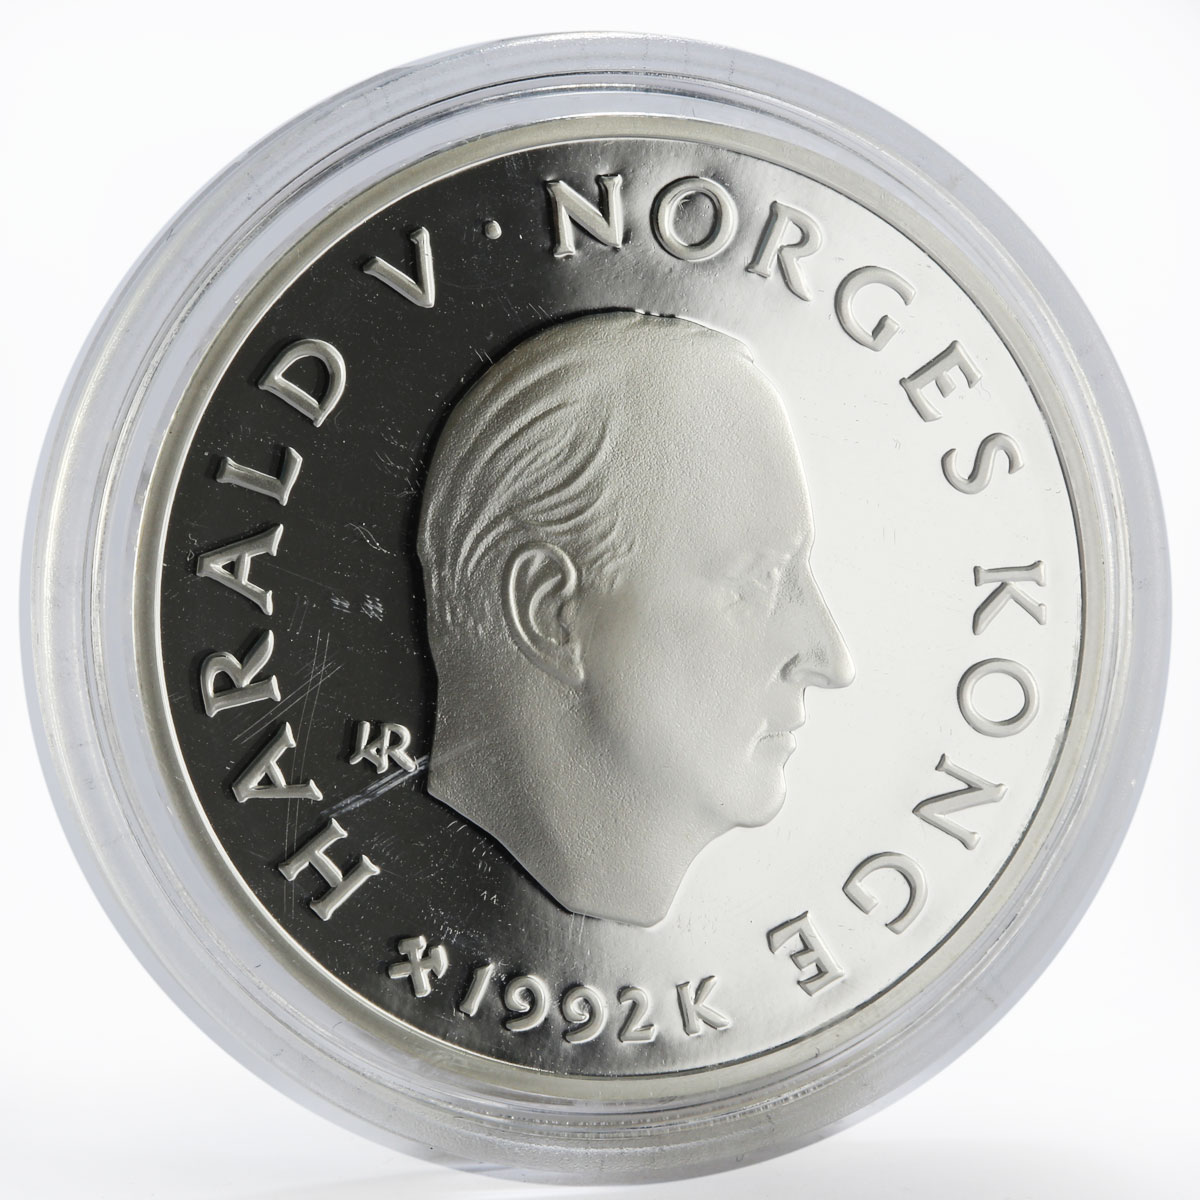 Norway 100 kroner 17th Winter Olympics Ski Jumping sport proof silver coin 1992